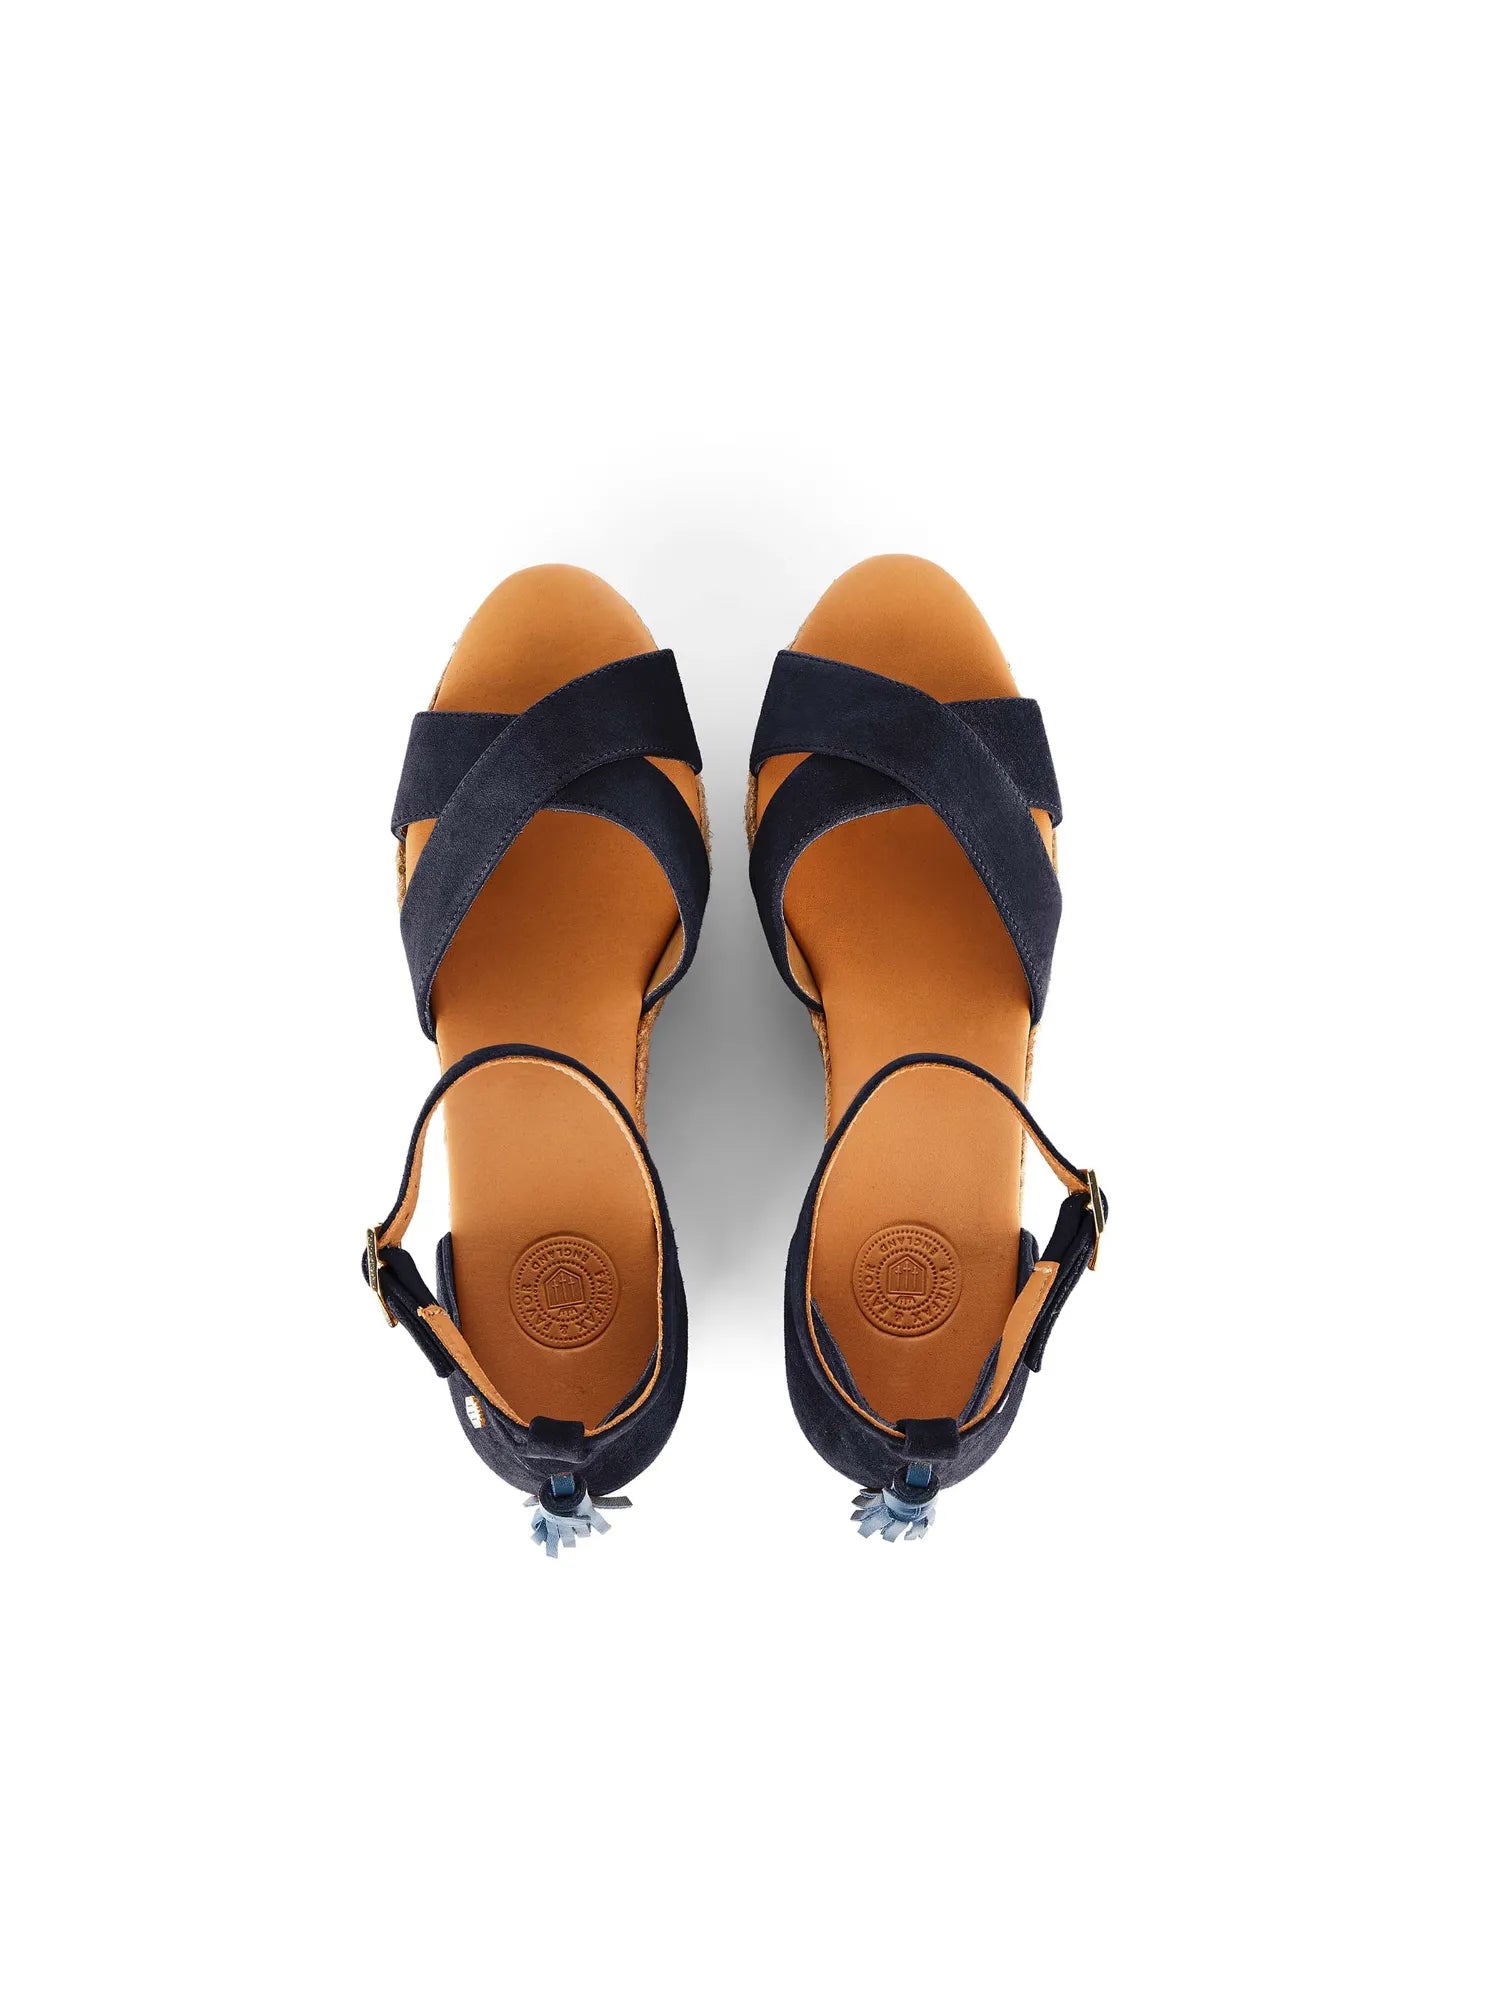 The Valencia Sandal - Navy Suede